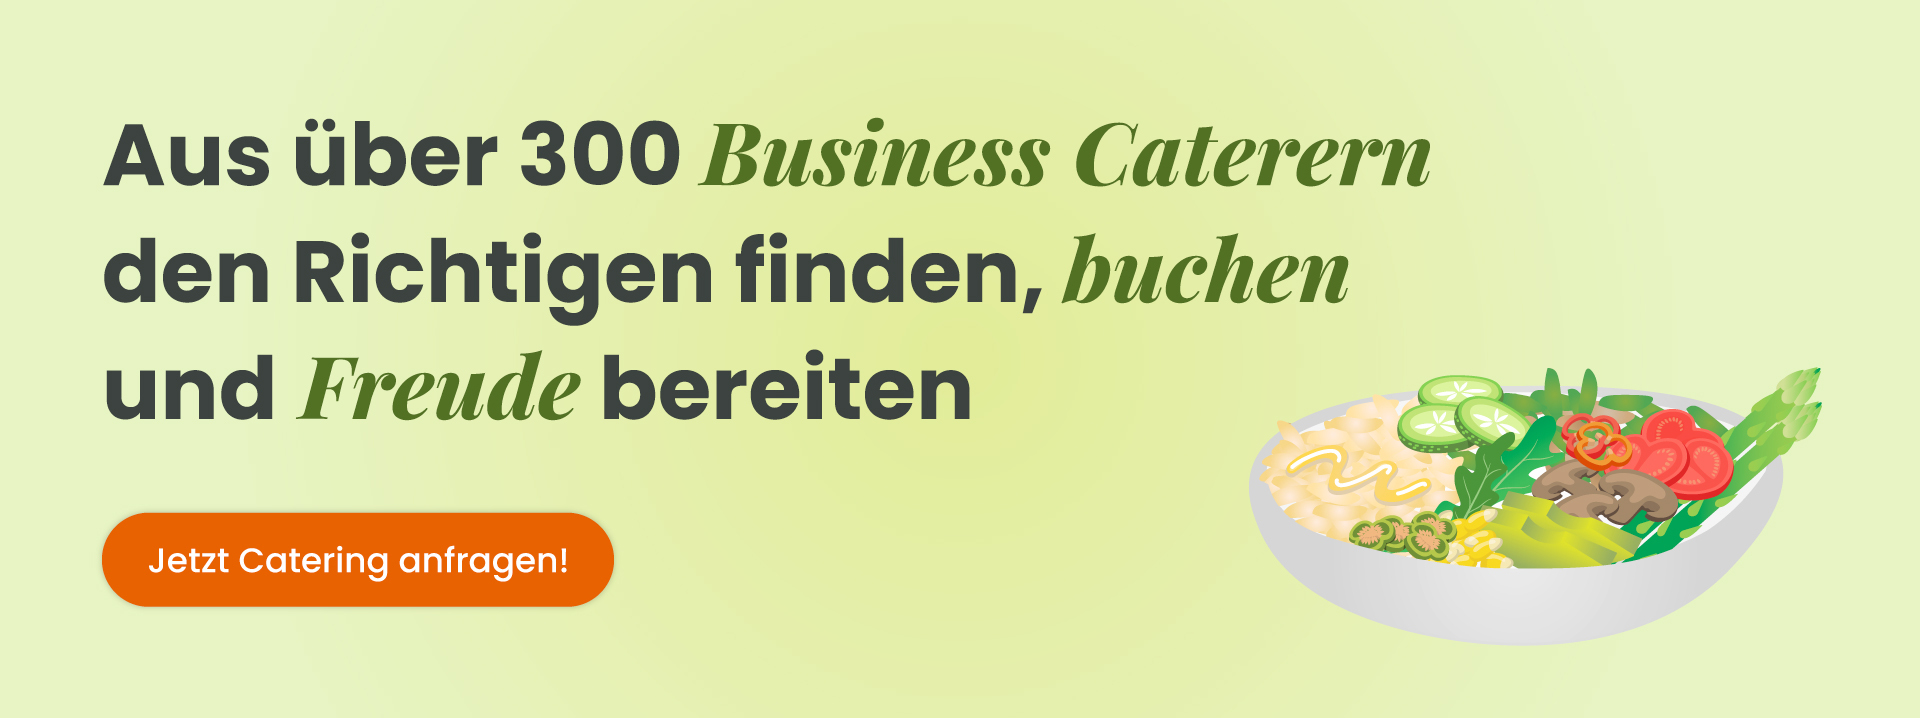 Business Catering anfragen